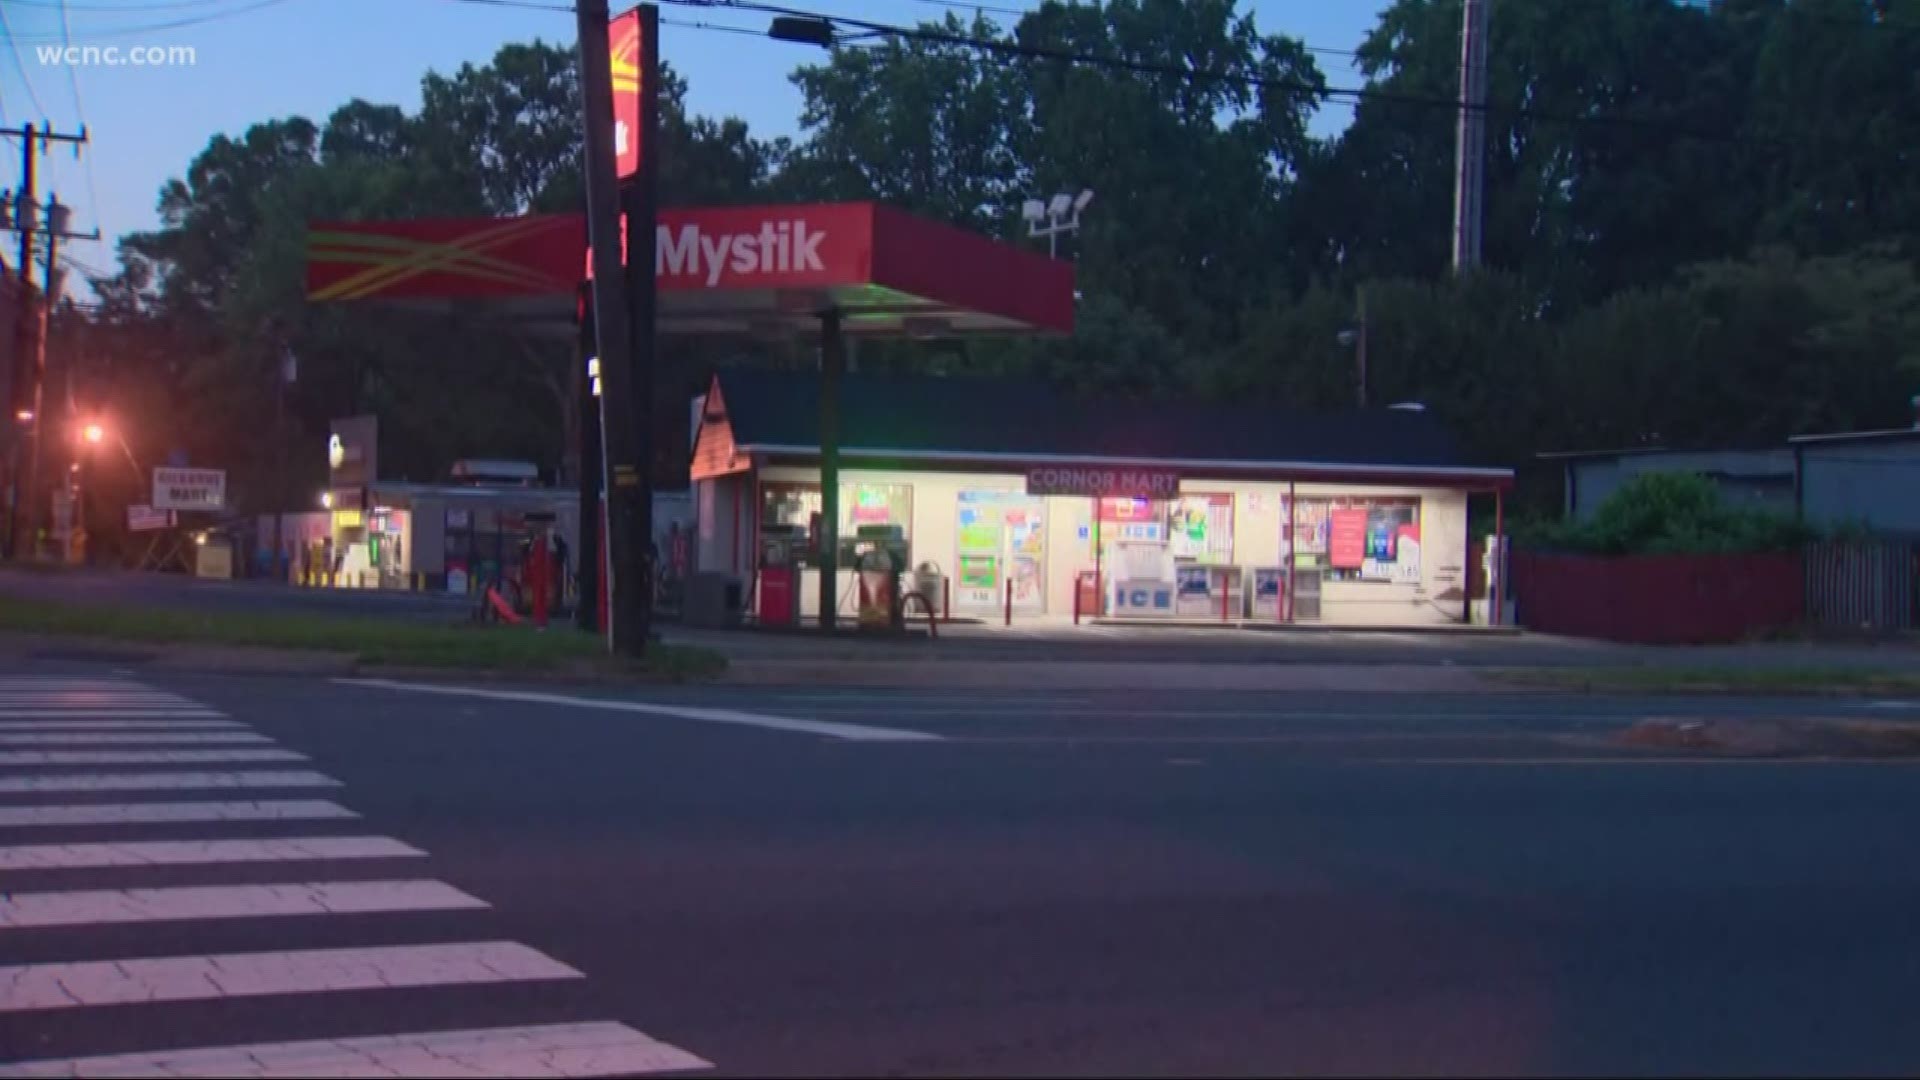 According to police, it appears the shooting happened when two men robbed the Corner Mart convenience store.